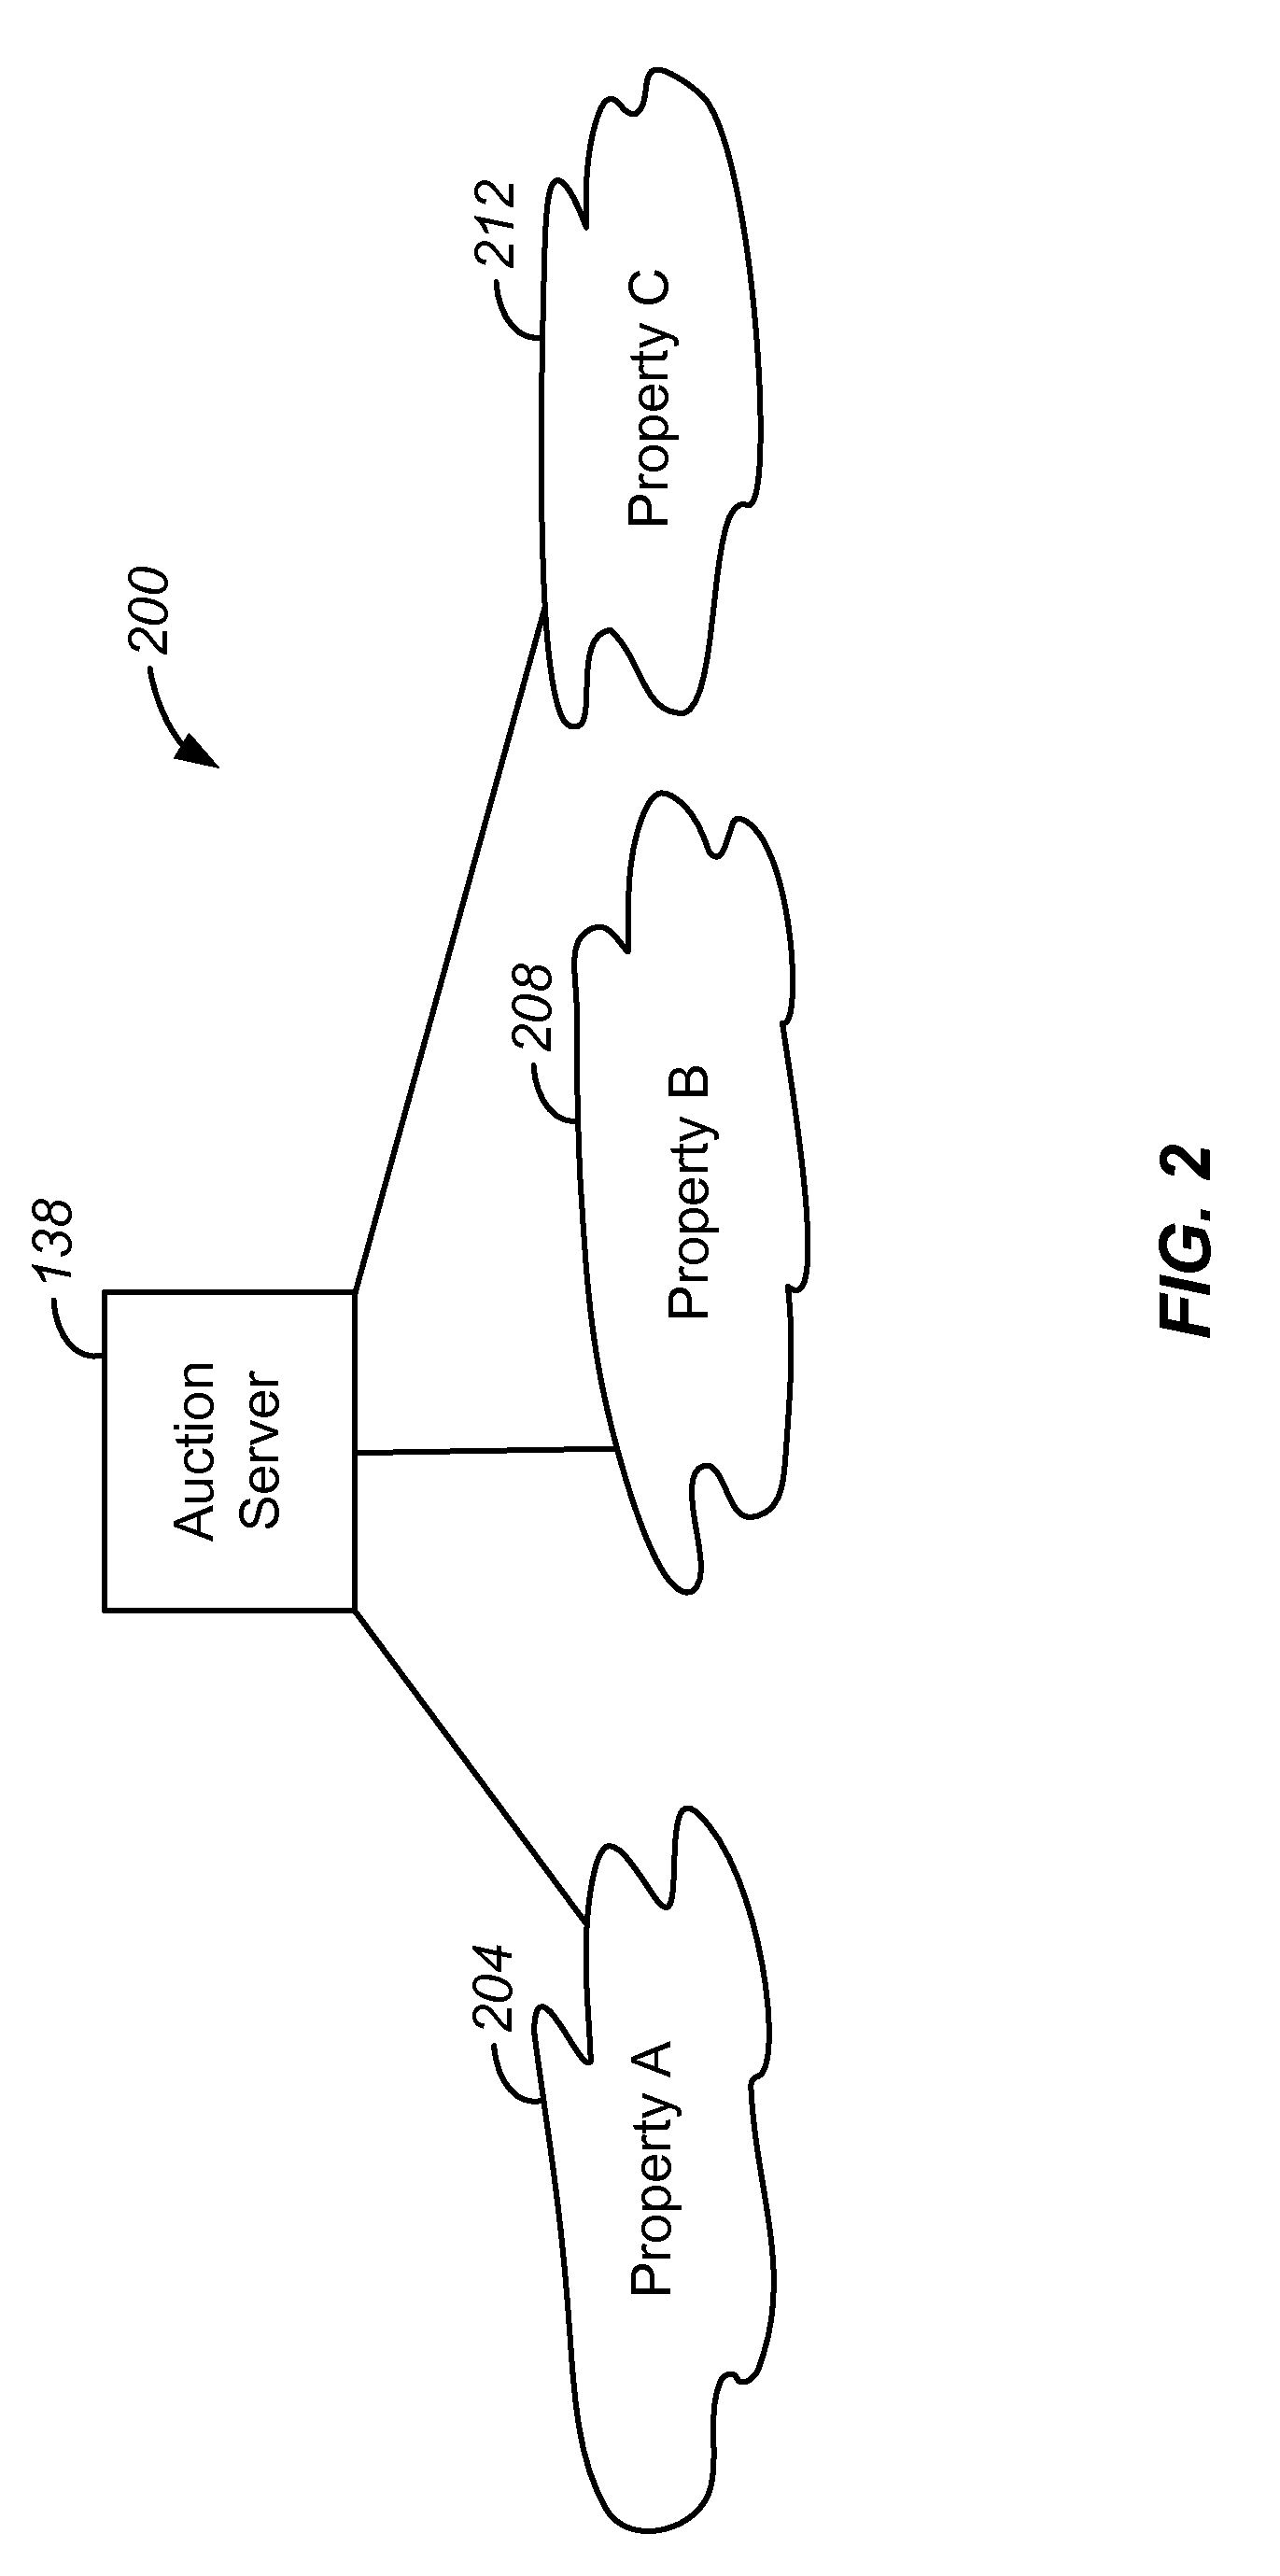 Methods and apparatus for providing for disposition of promotional offers in a wagering environment